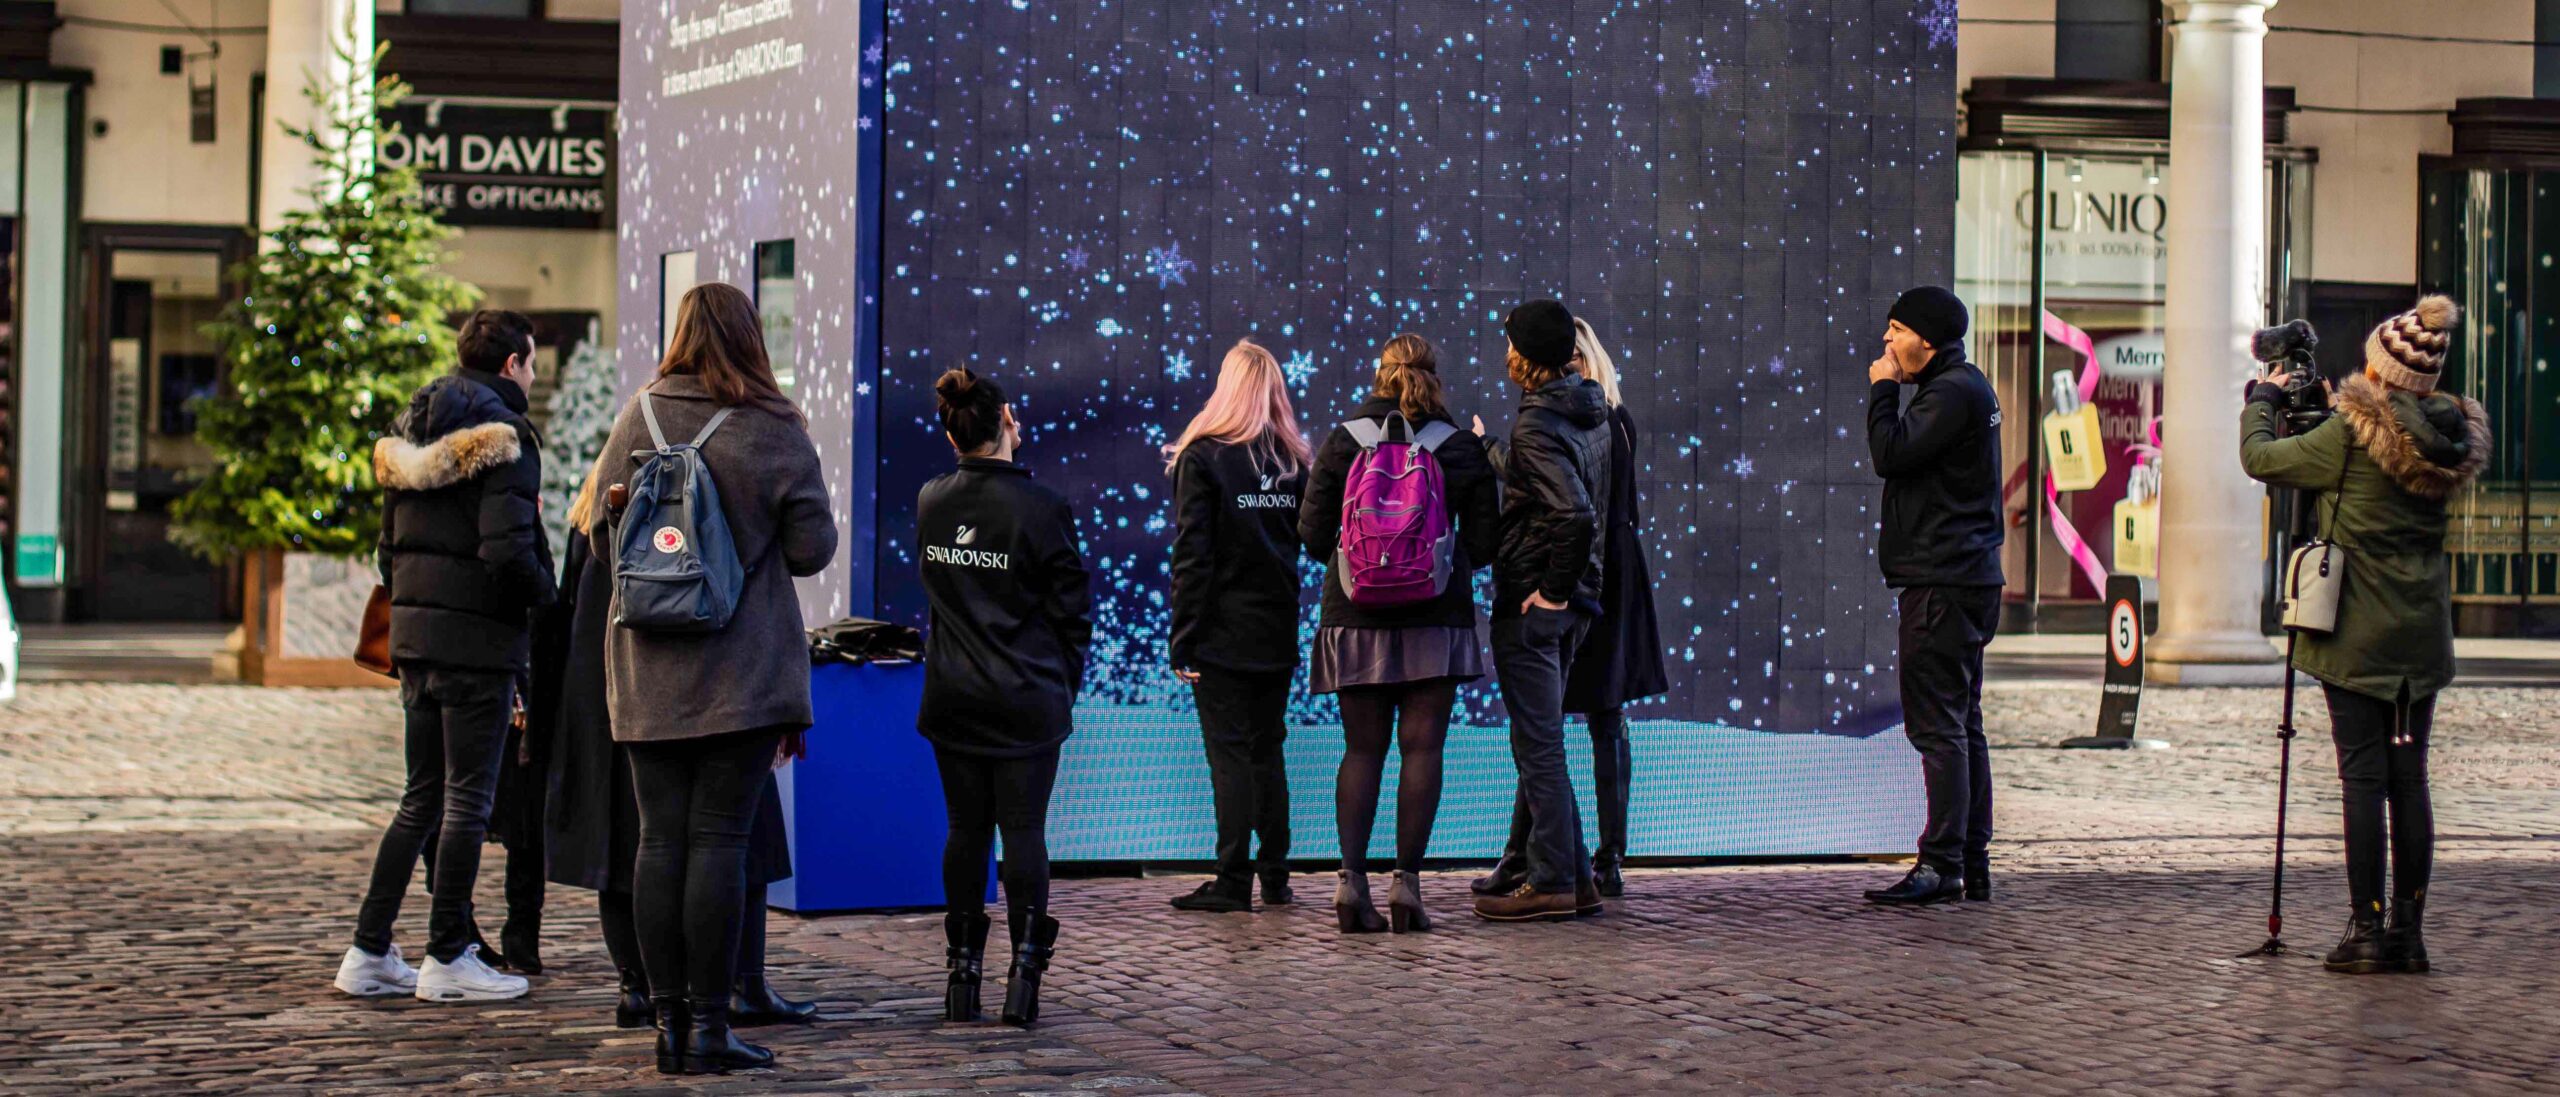 Swarovski Promotional Staff in Covent Garden for resources